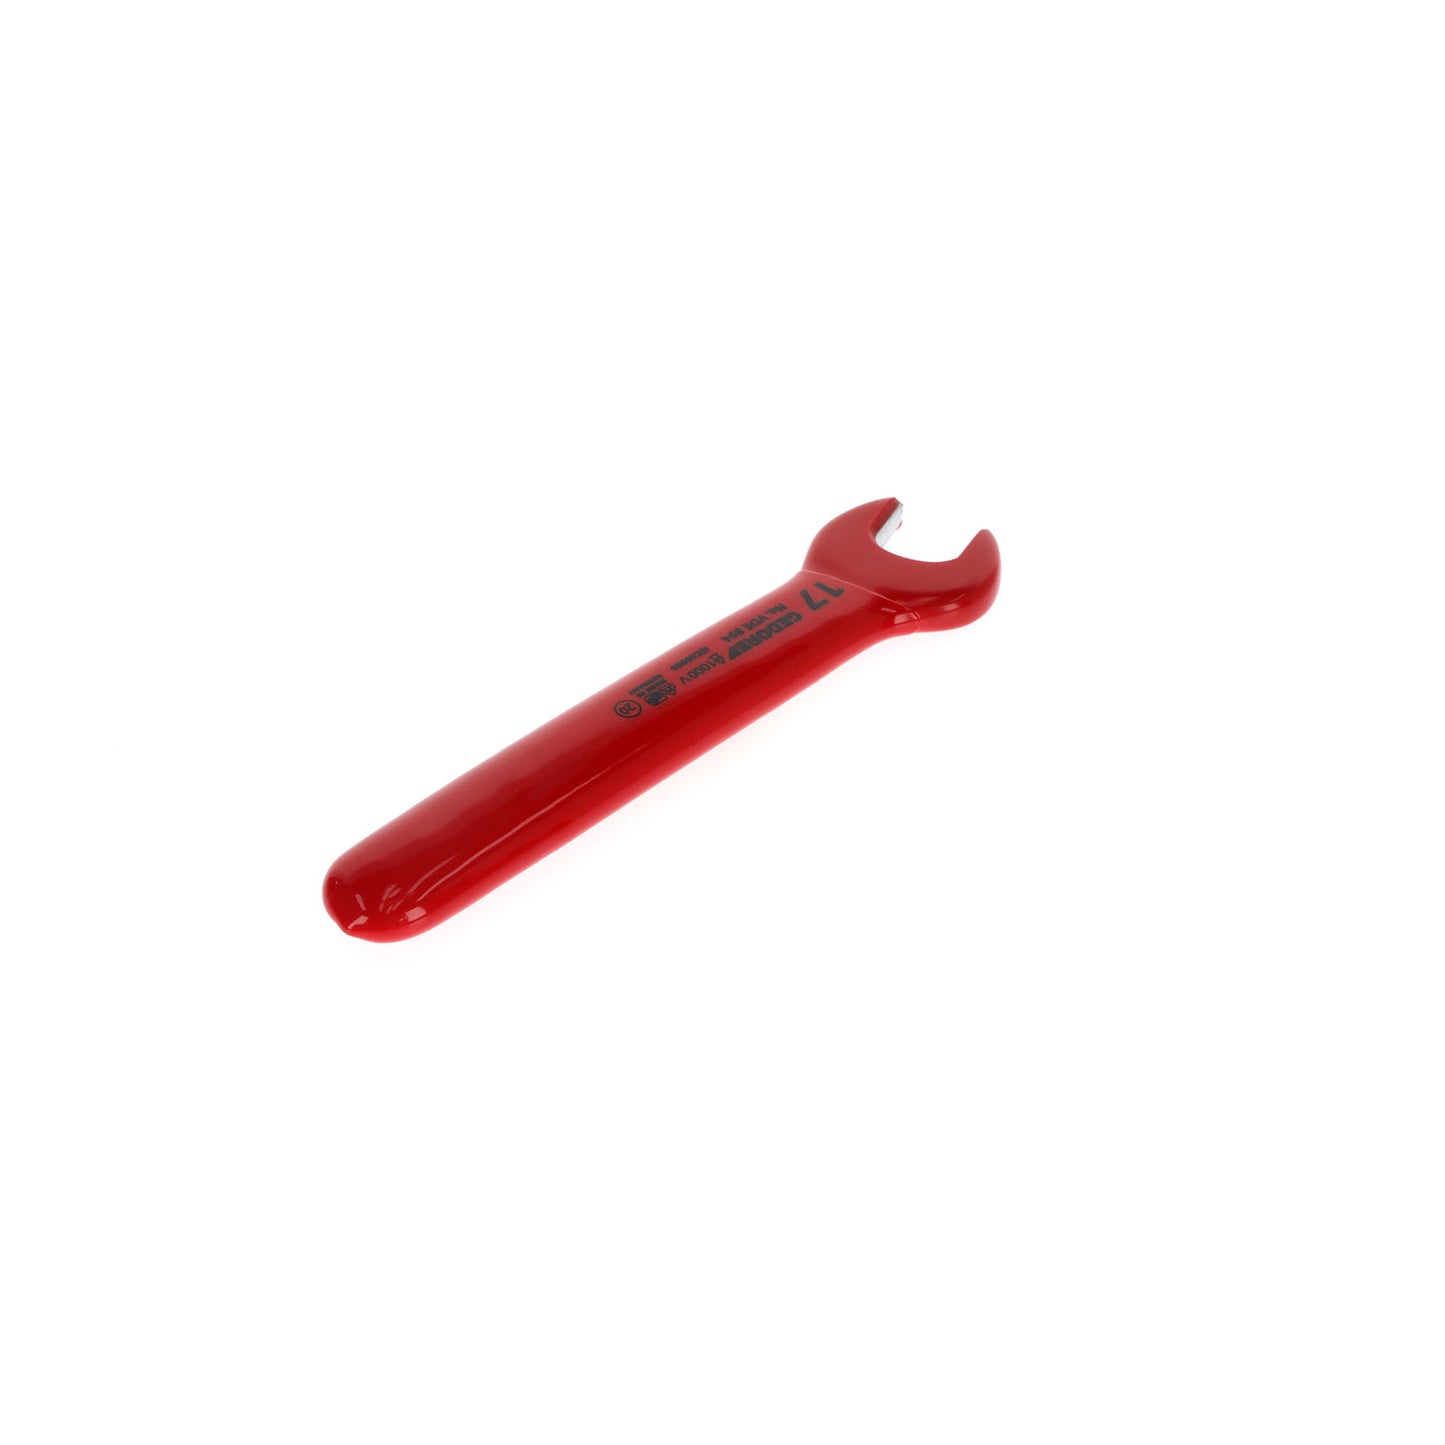 GEDORE VDE 894 17 - VDE Fixed Spanner 17 mm (6572980)